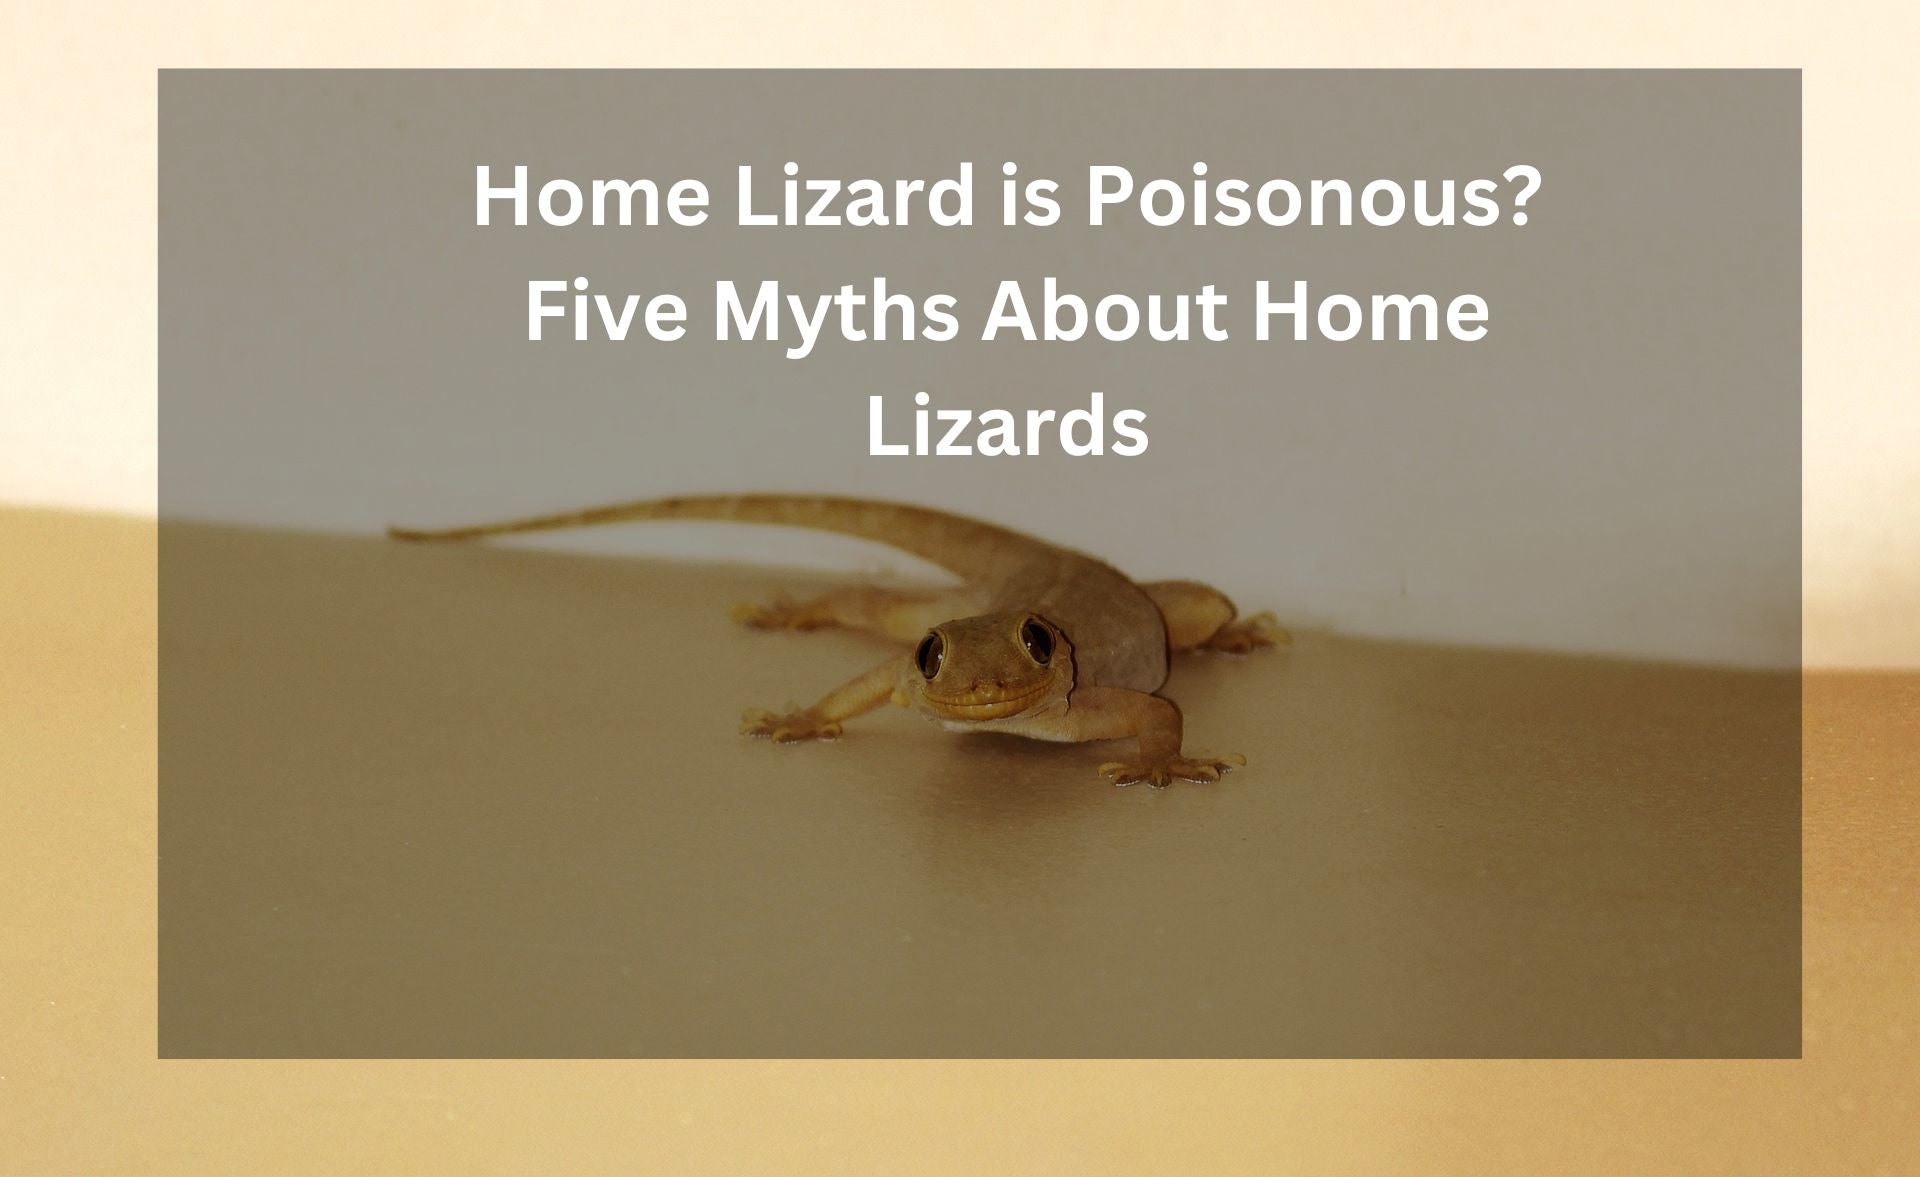 Home Lizard is Poisonous? Five Myths About Home Lizards